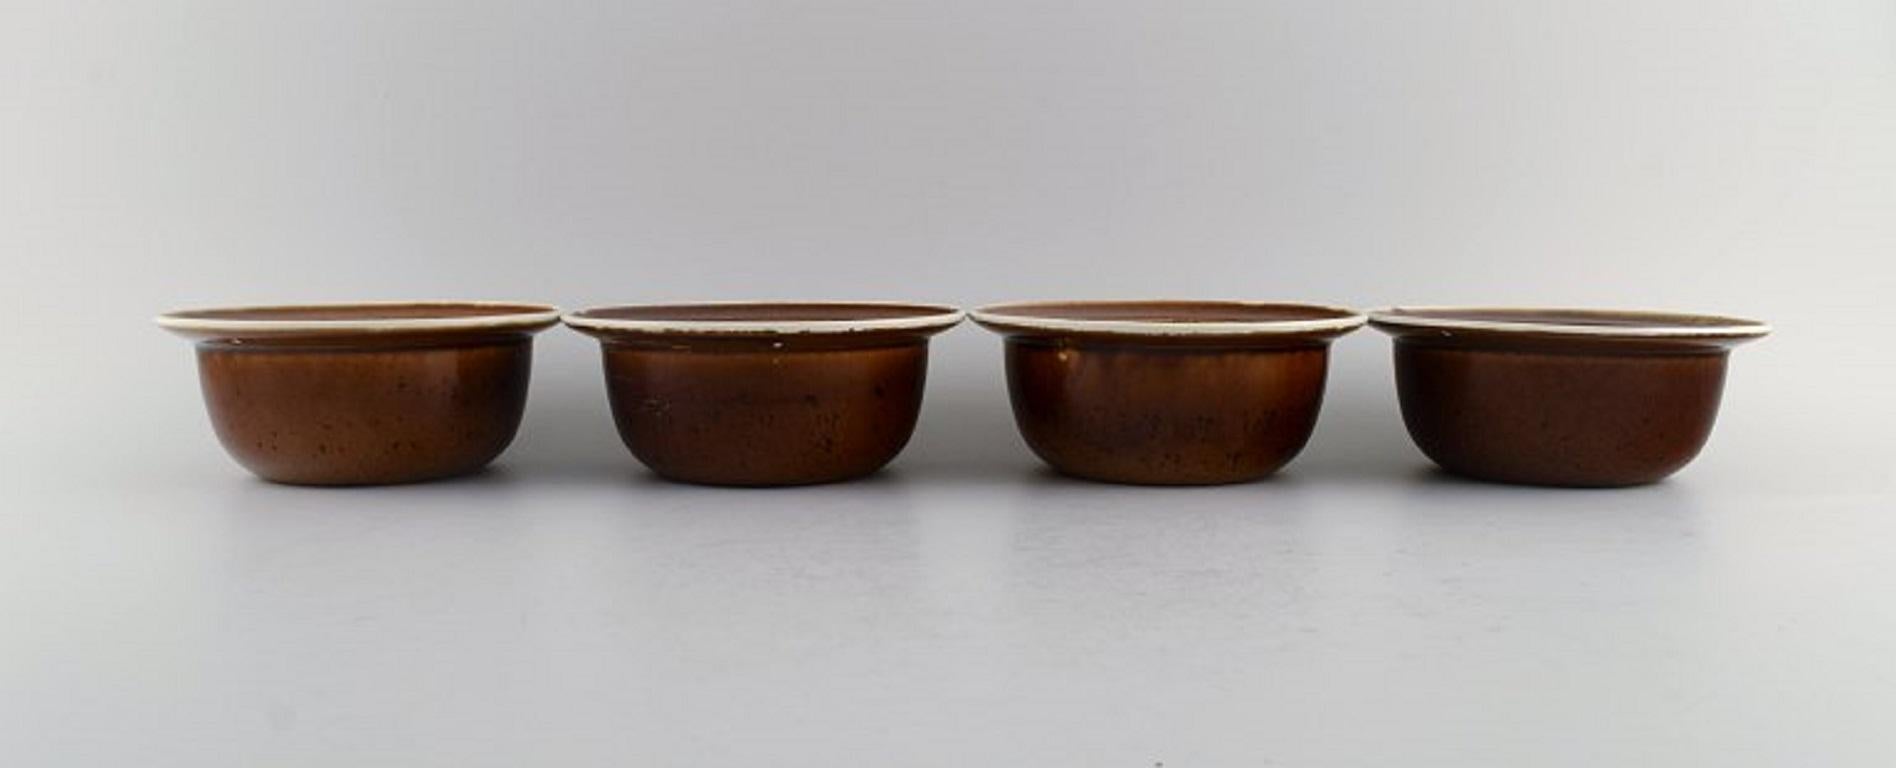 Stig Lindberg for Gustavsberg. Four Coq bowls in glazed stoneware. 
Beautiful glaze in brown shades. Swedish design, 1960s.
Measures: 16 x 6.5 cm.
In excellent condition.
Stamped.